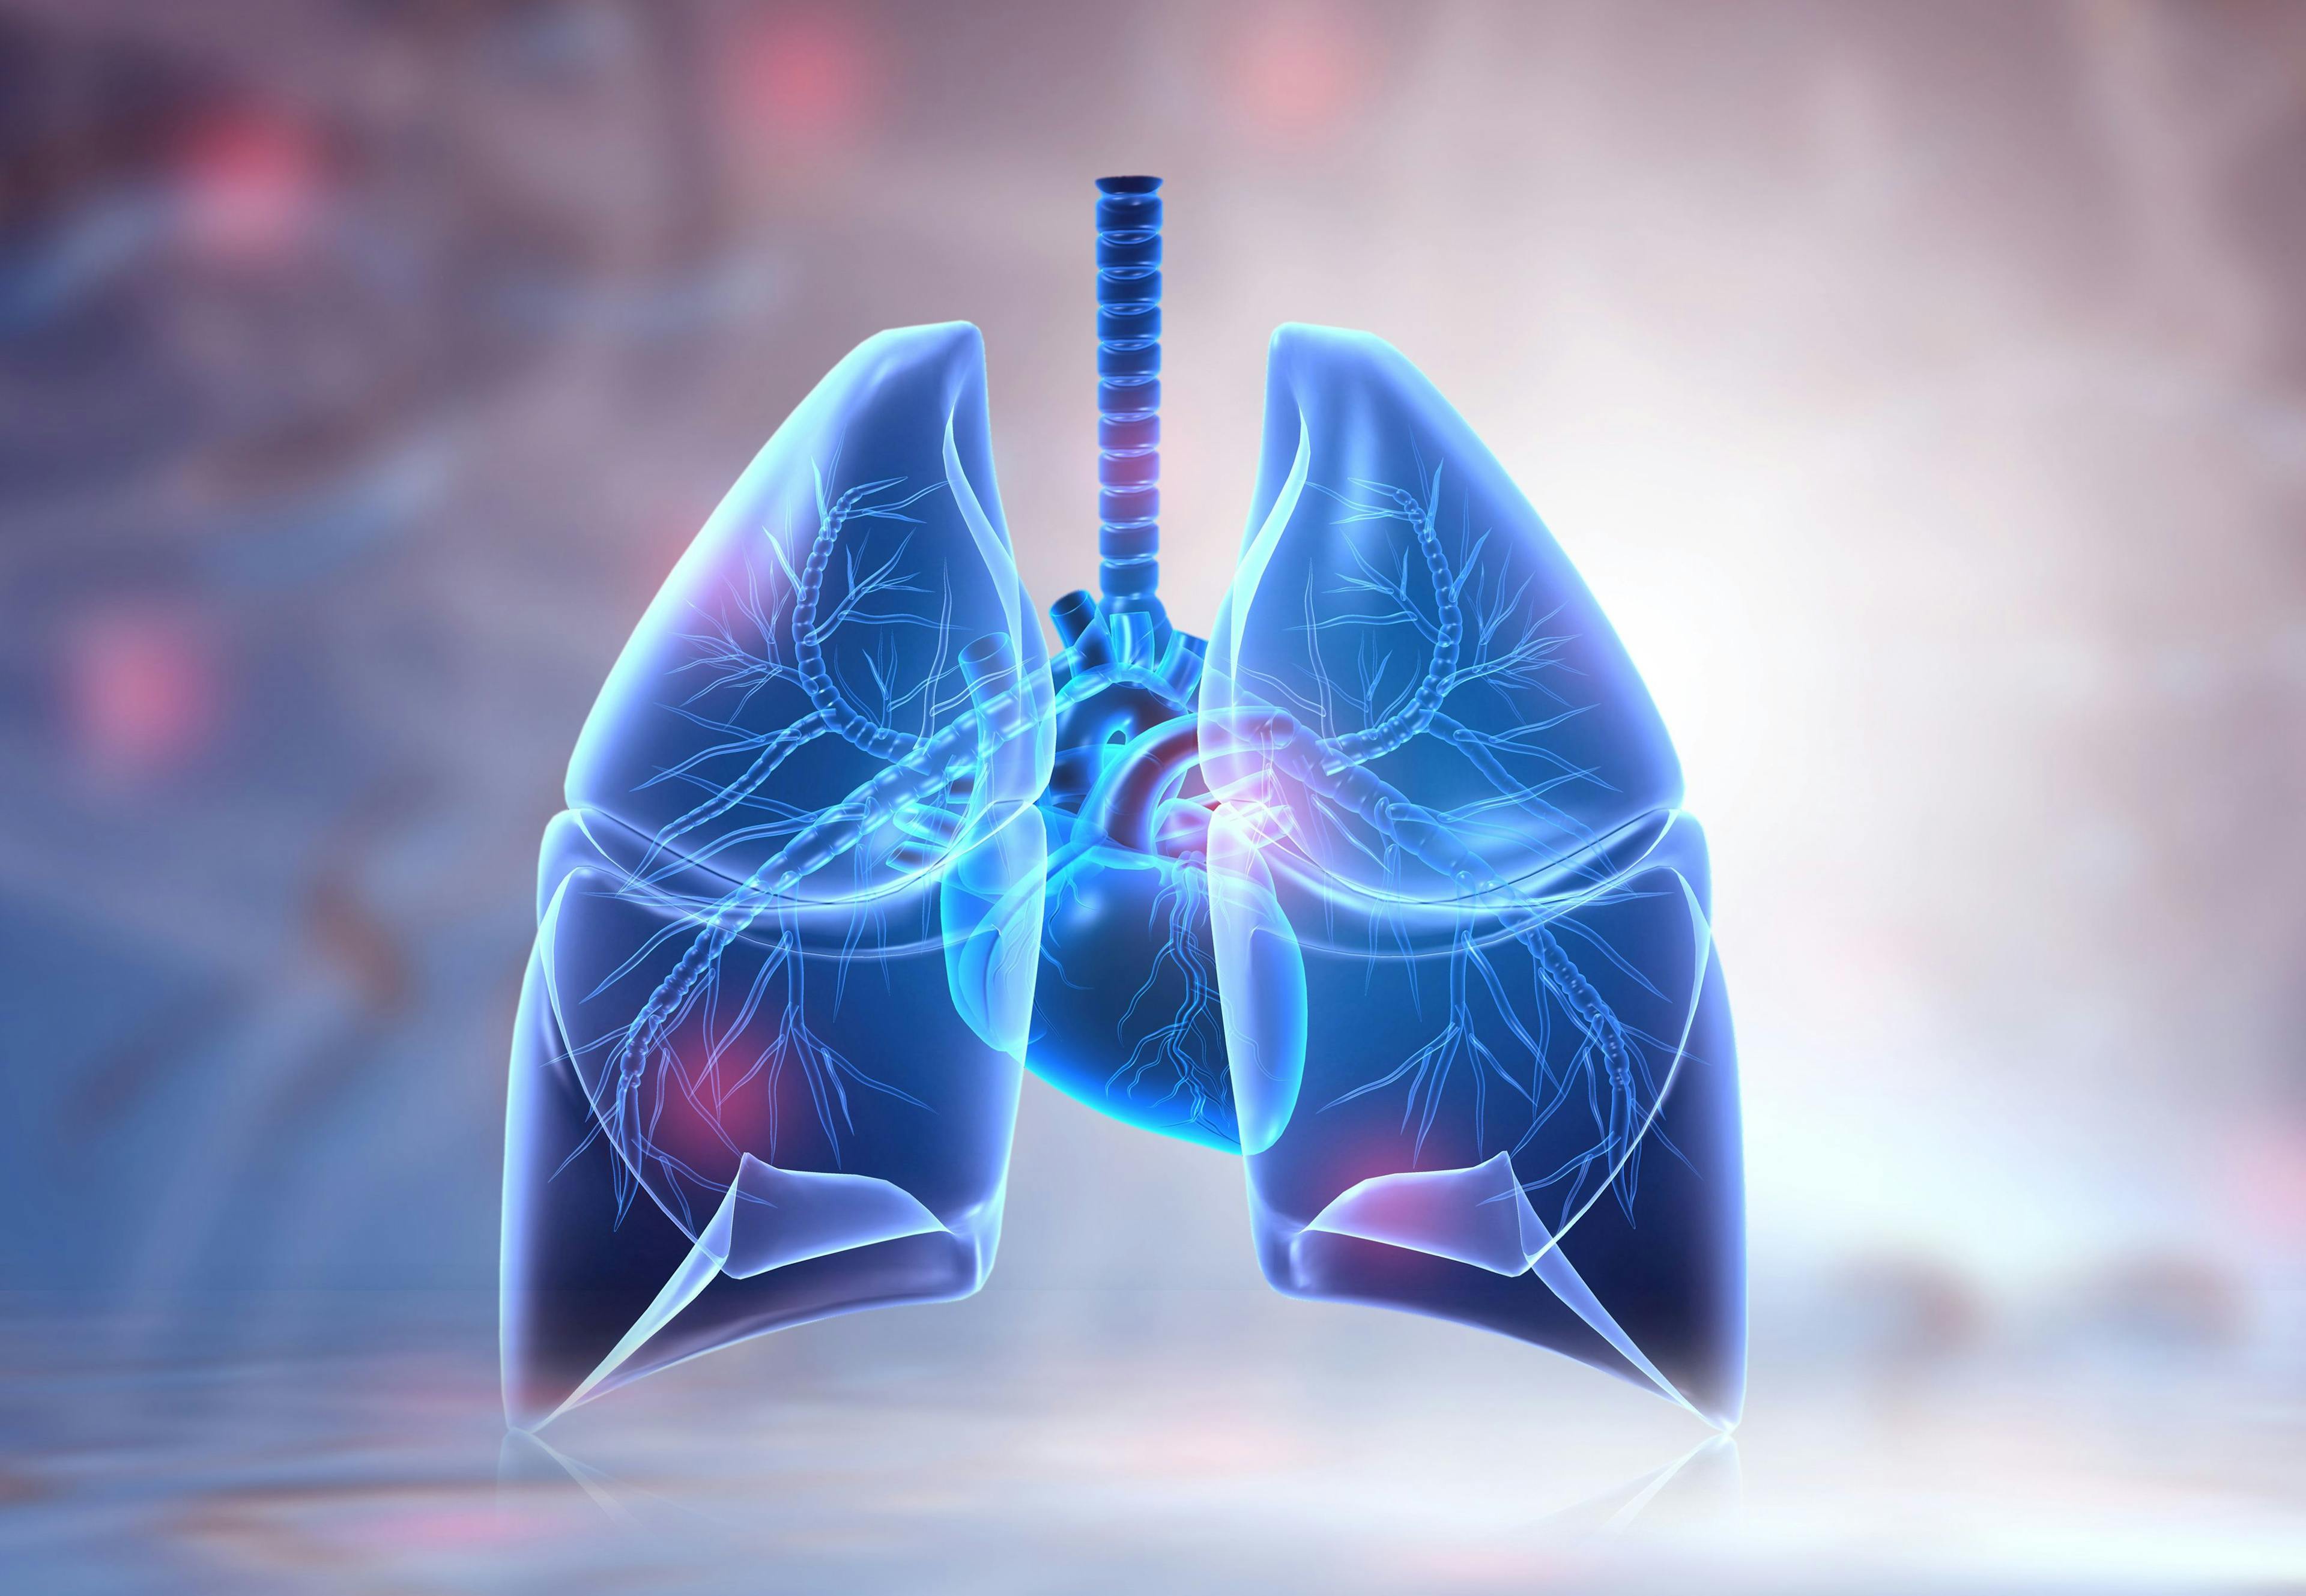 Lungs and Heart | Image credit: Rasi - stock.adobe.com